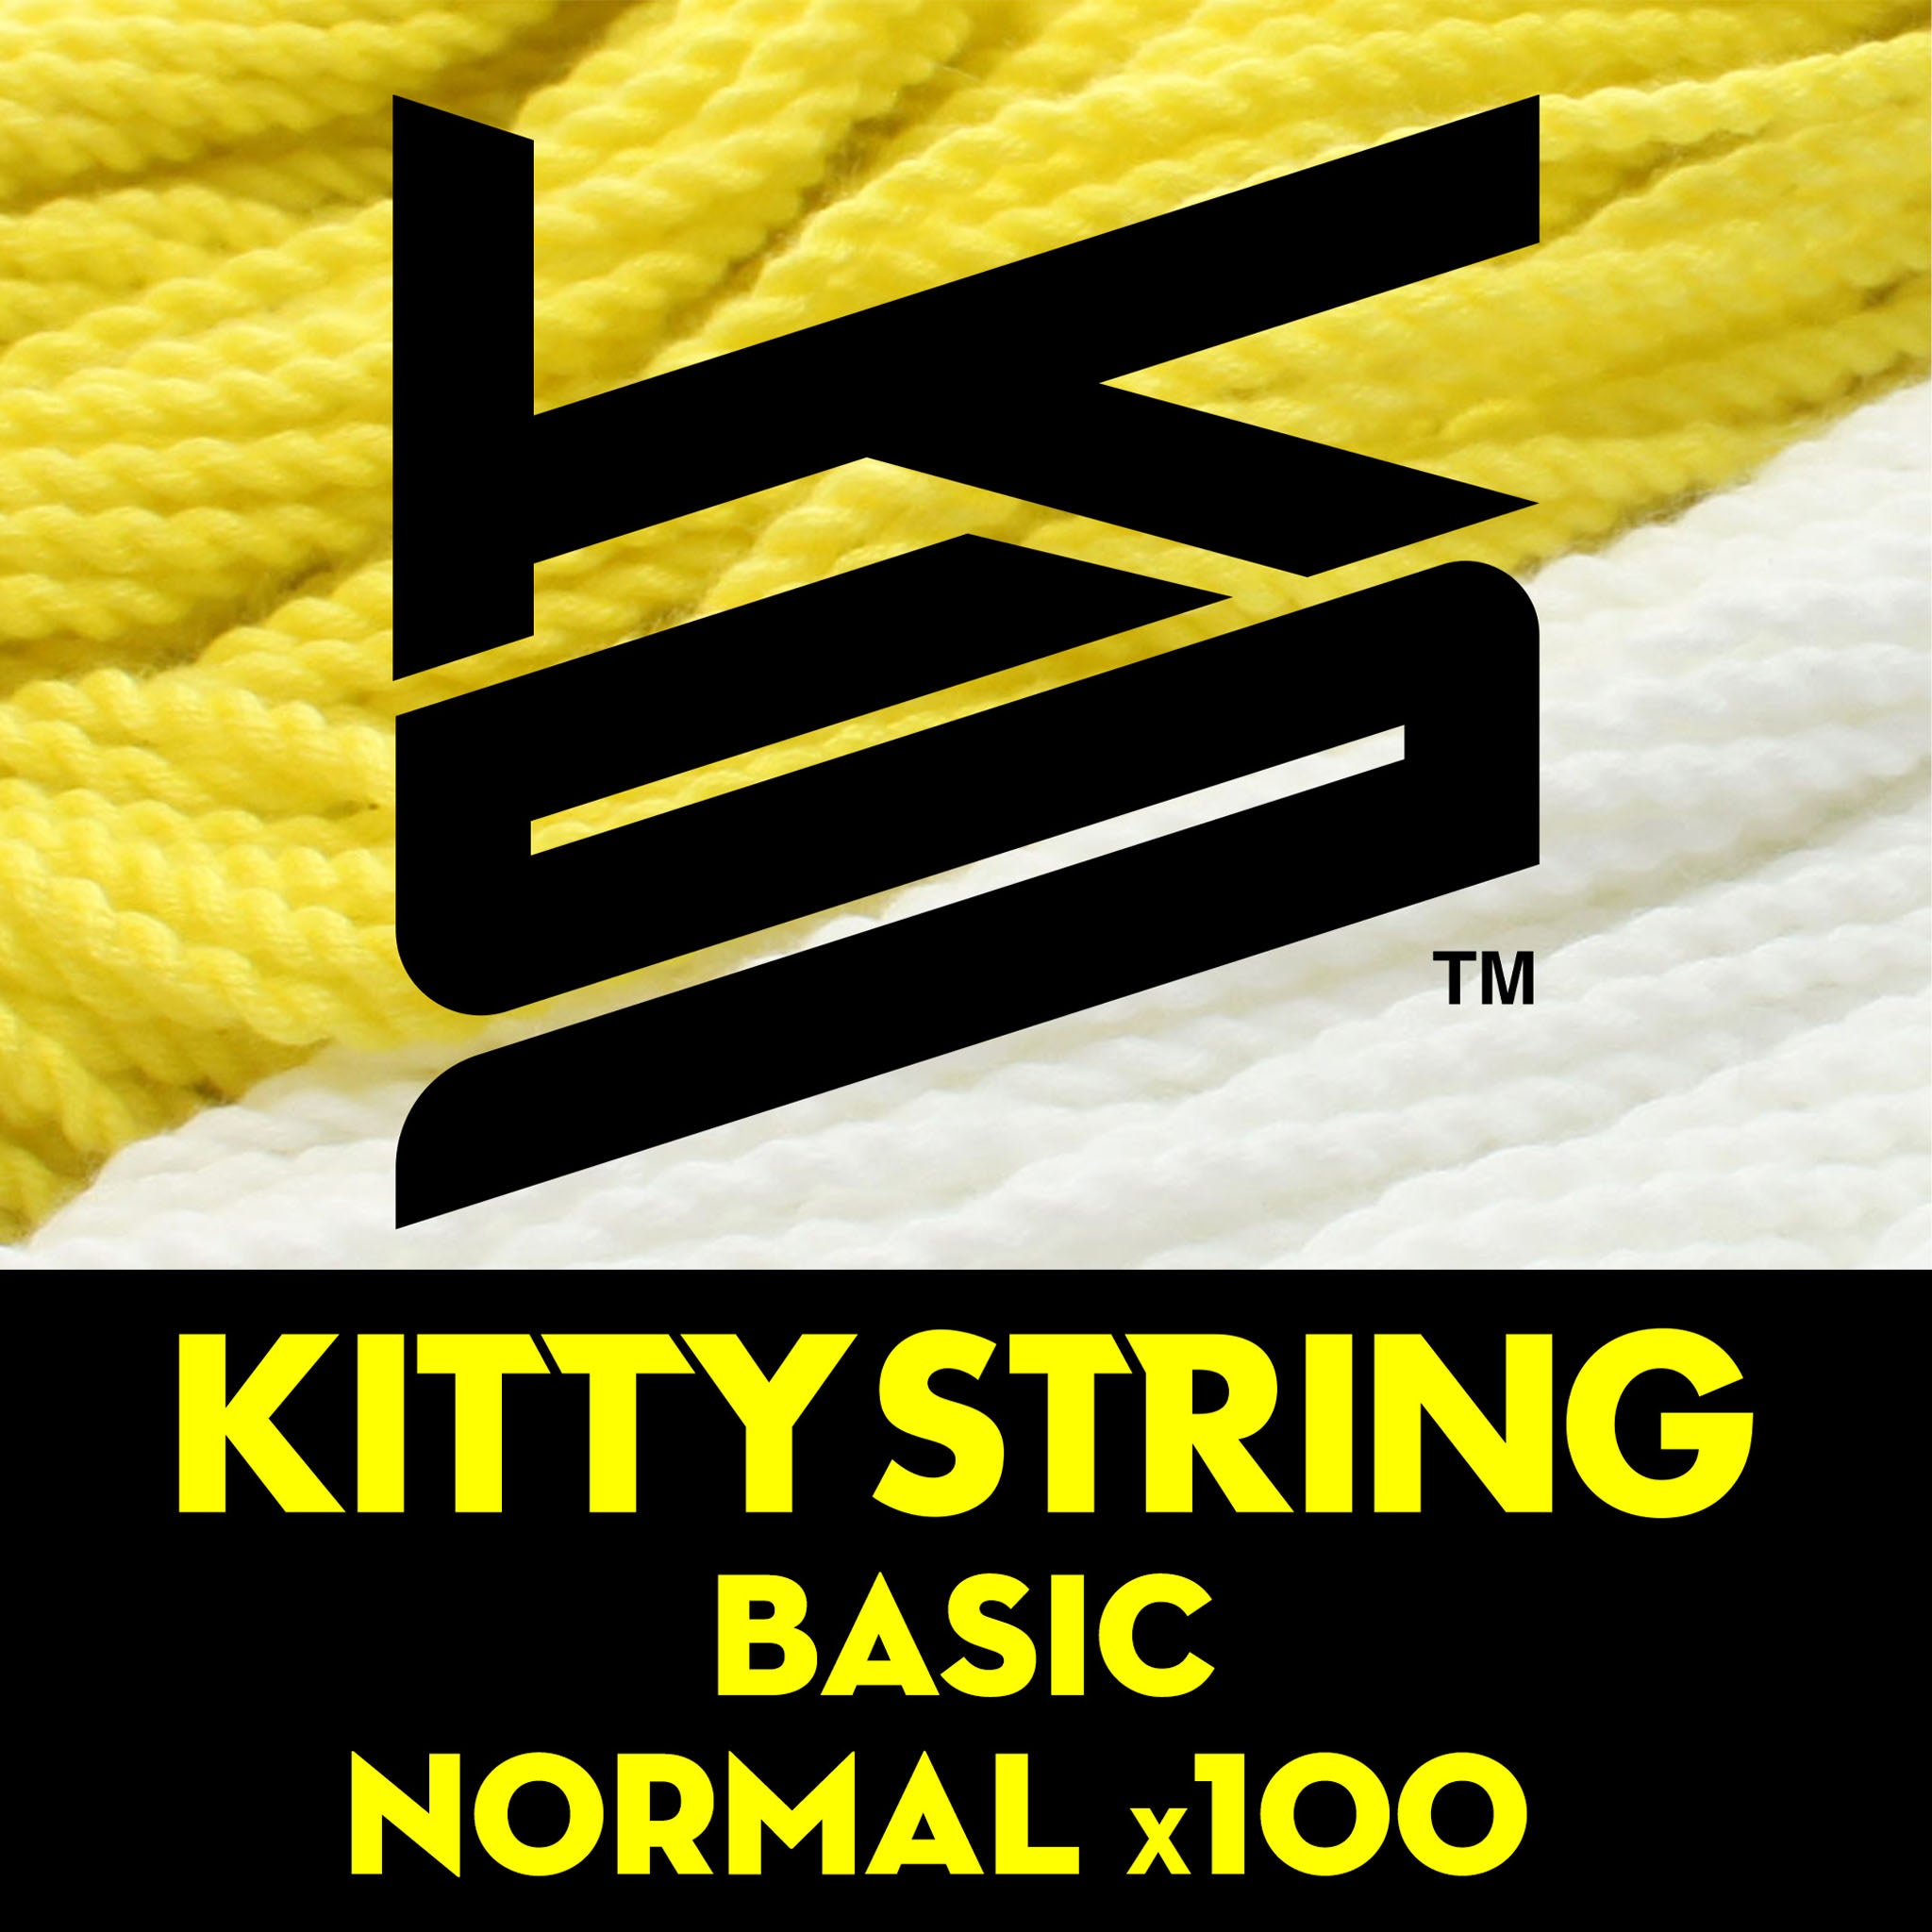 Kitty String (Poly100%) "Basic" Normal x100